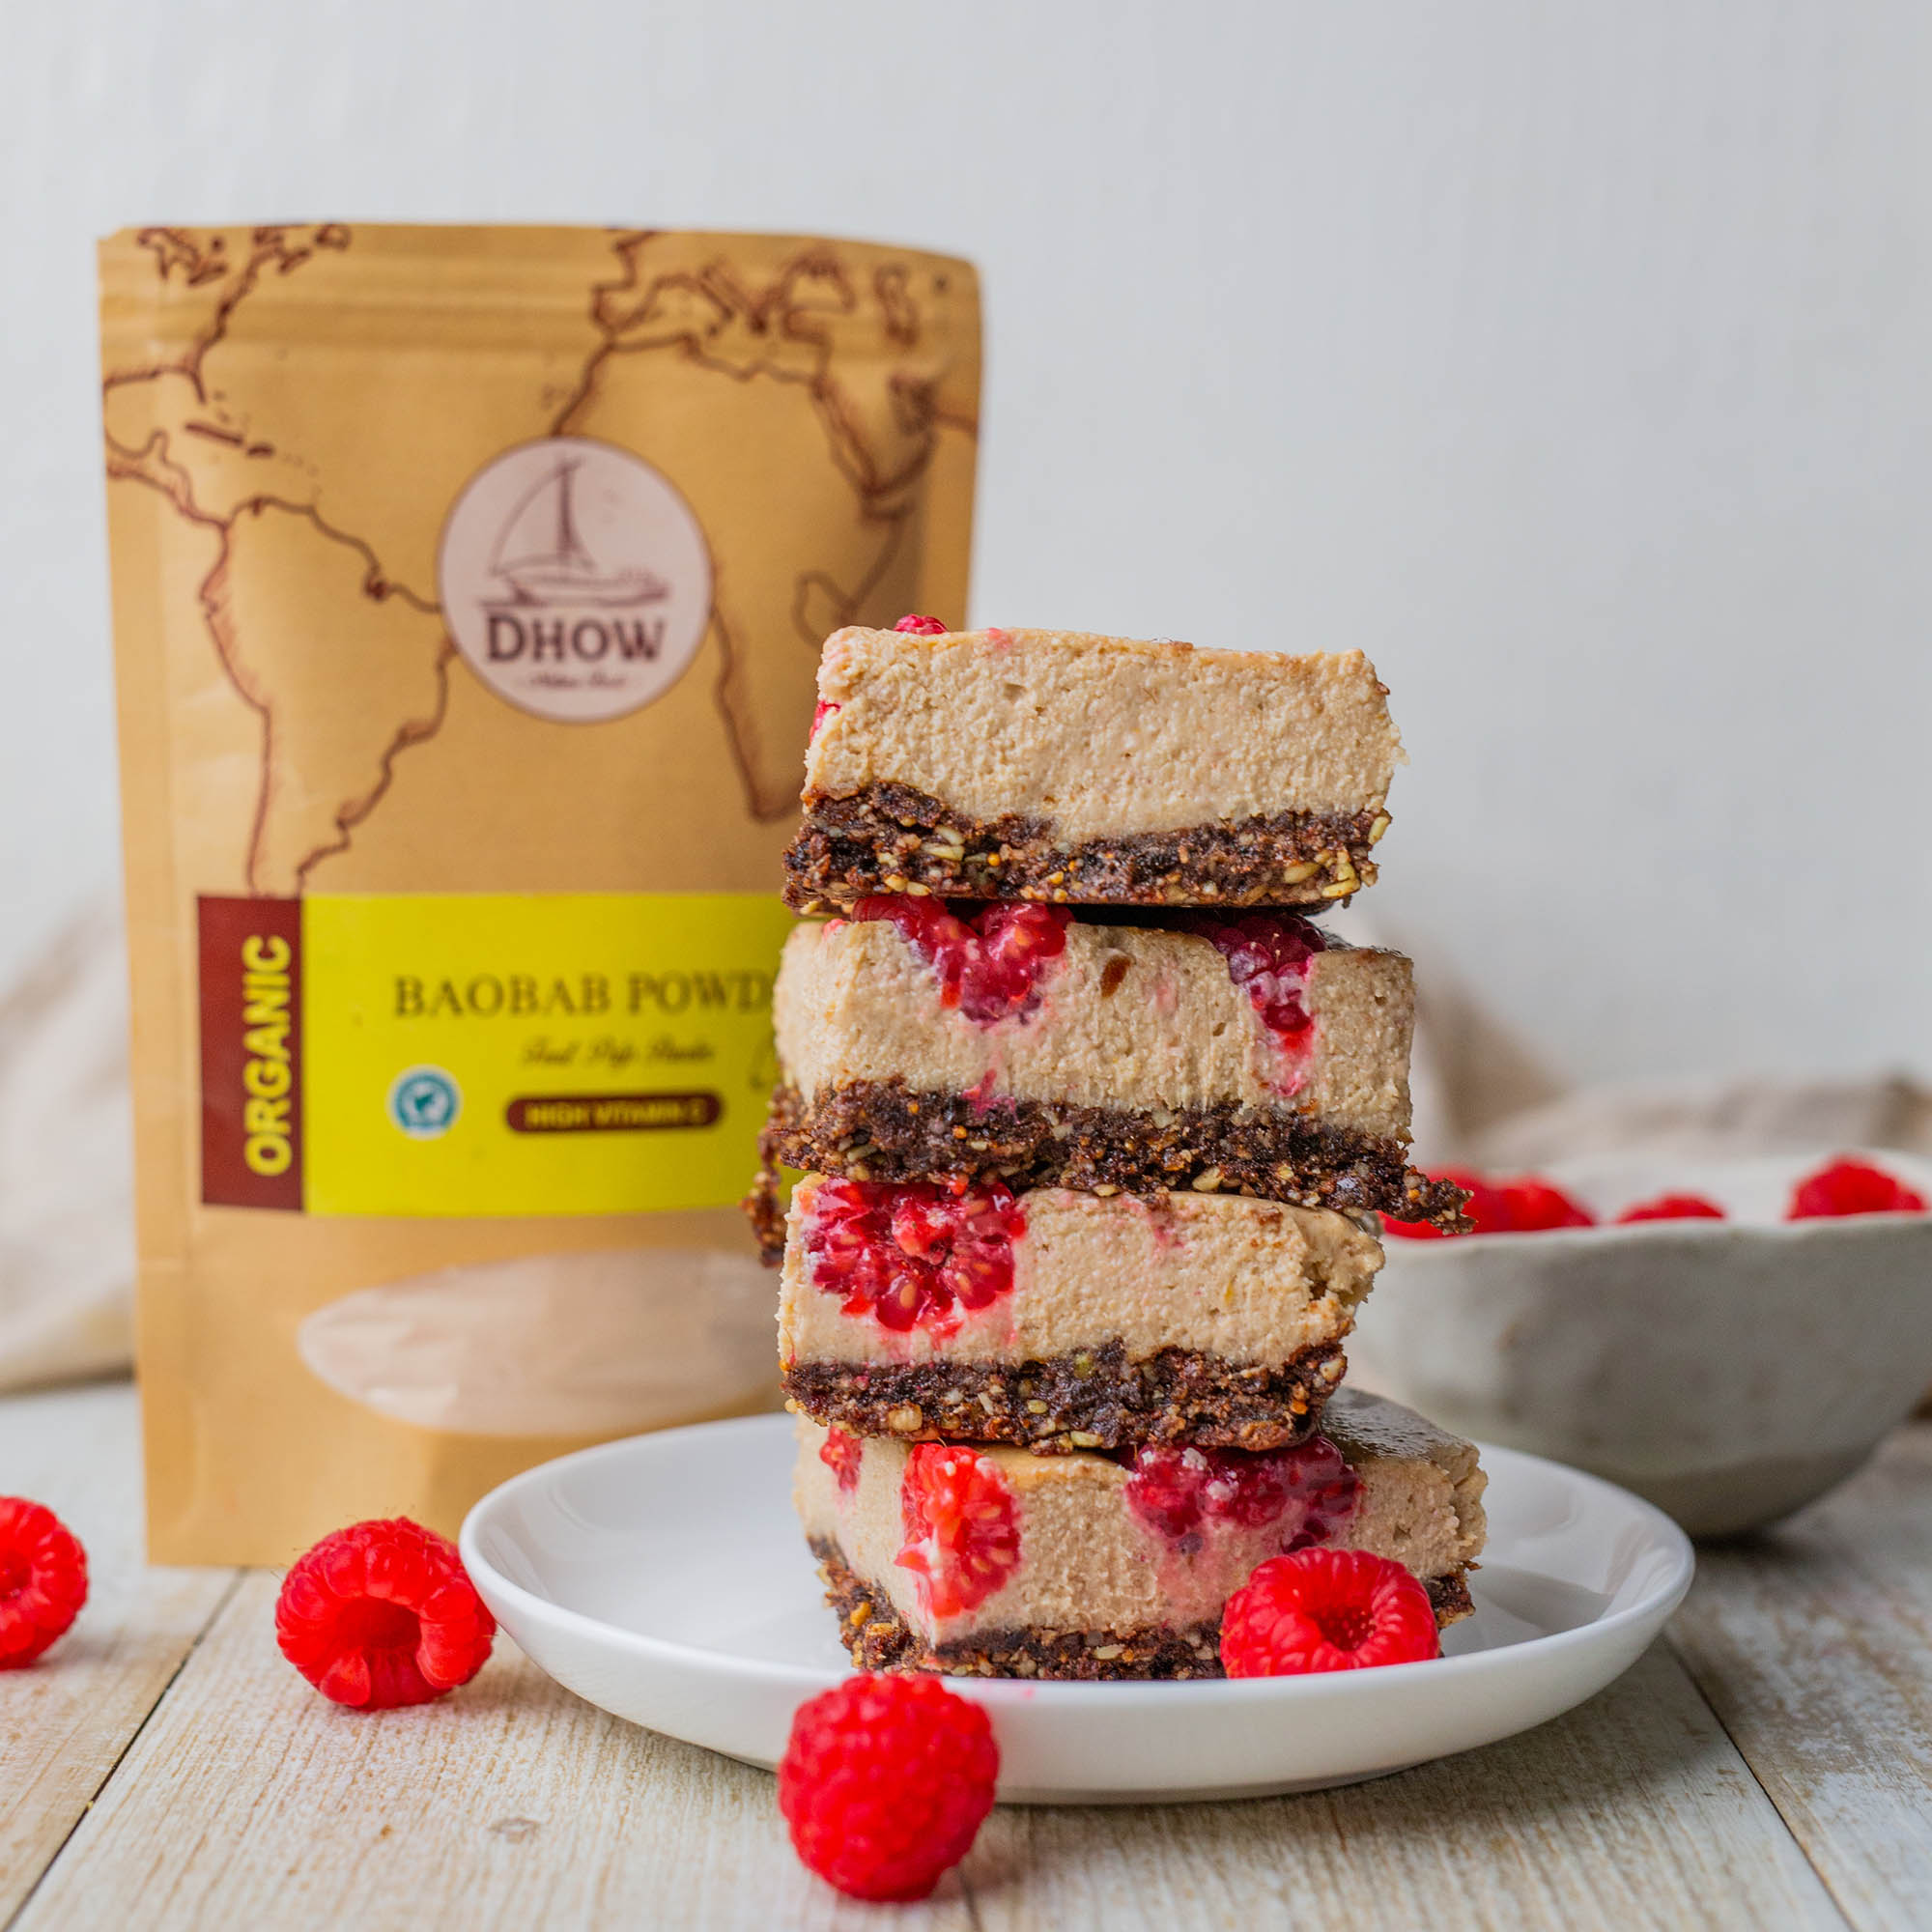 Baobab Fruit Powder for Natural PMS Relief with Vegan Peanut Butter Raspberry Boabab Cheesecake Slice